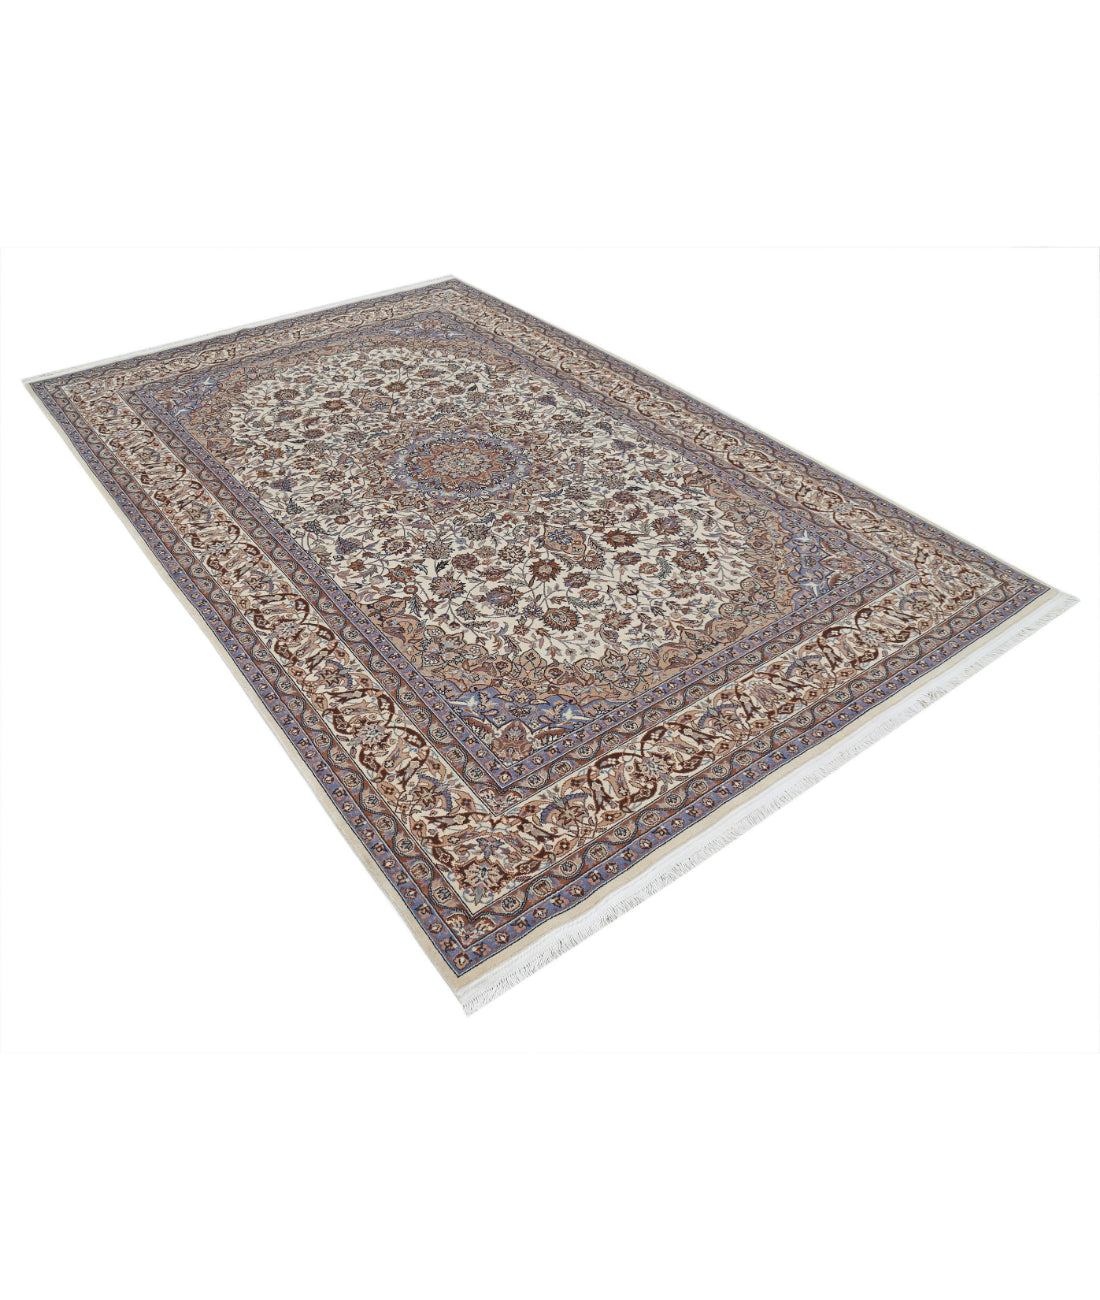 Hand Knotted Heritage Persian Style Wool Rug - 6'1'' x 9'0'' 6'1'' x 9'0'' (183 X 270) / Ivory / Blue